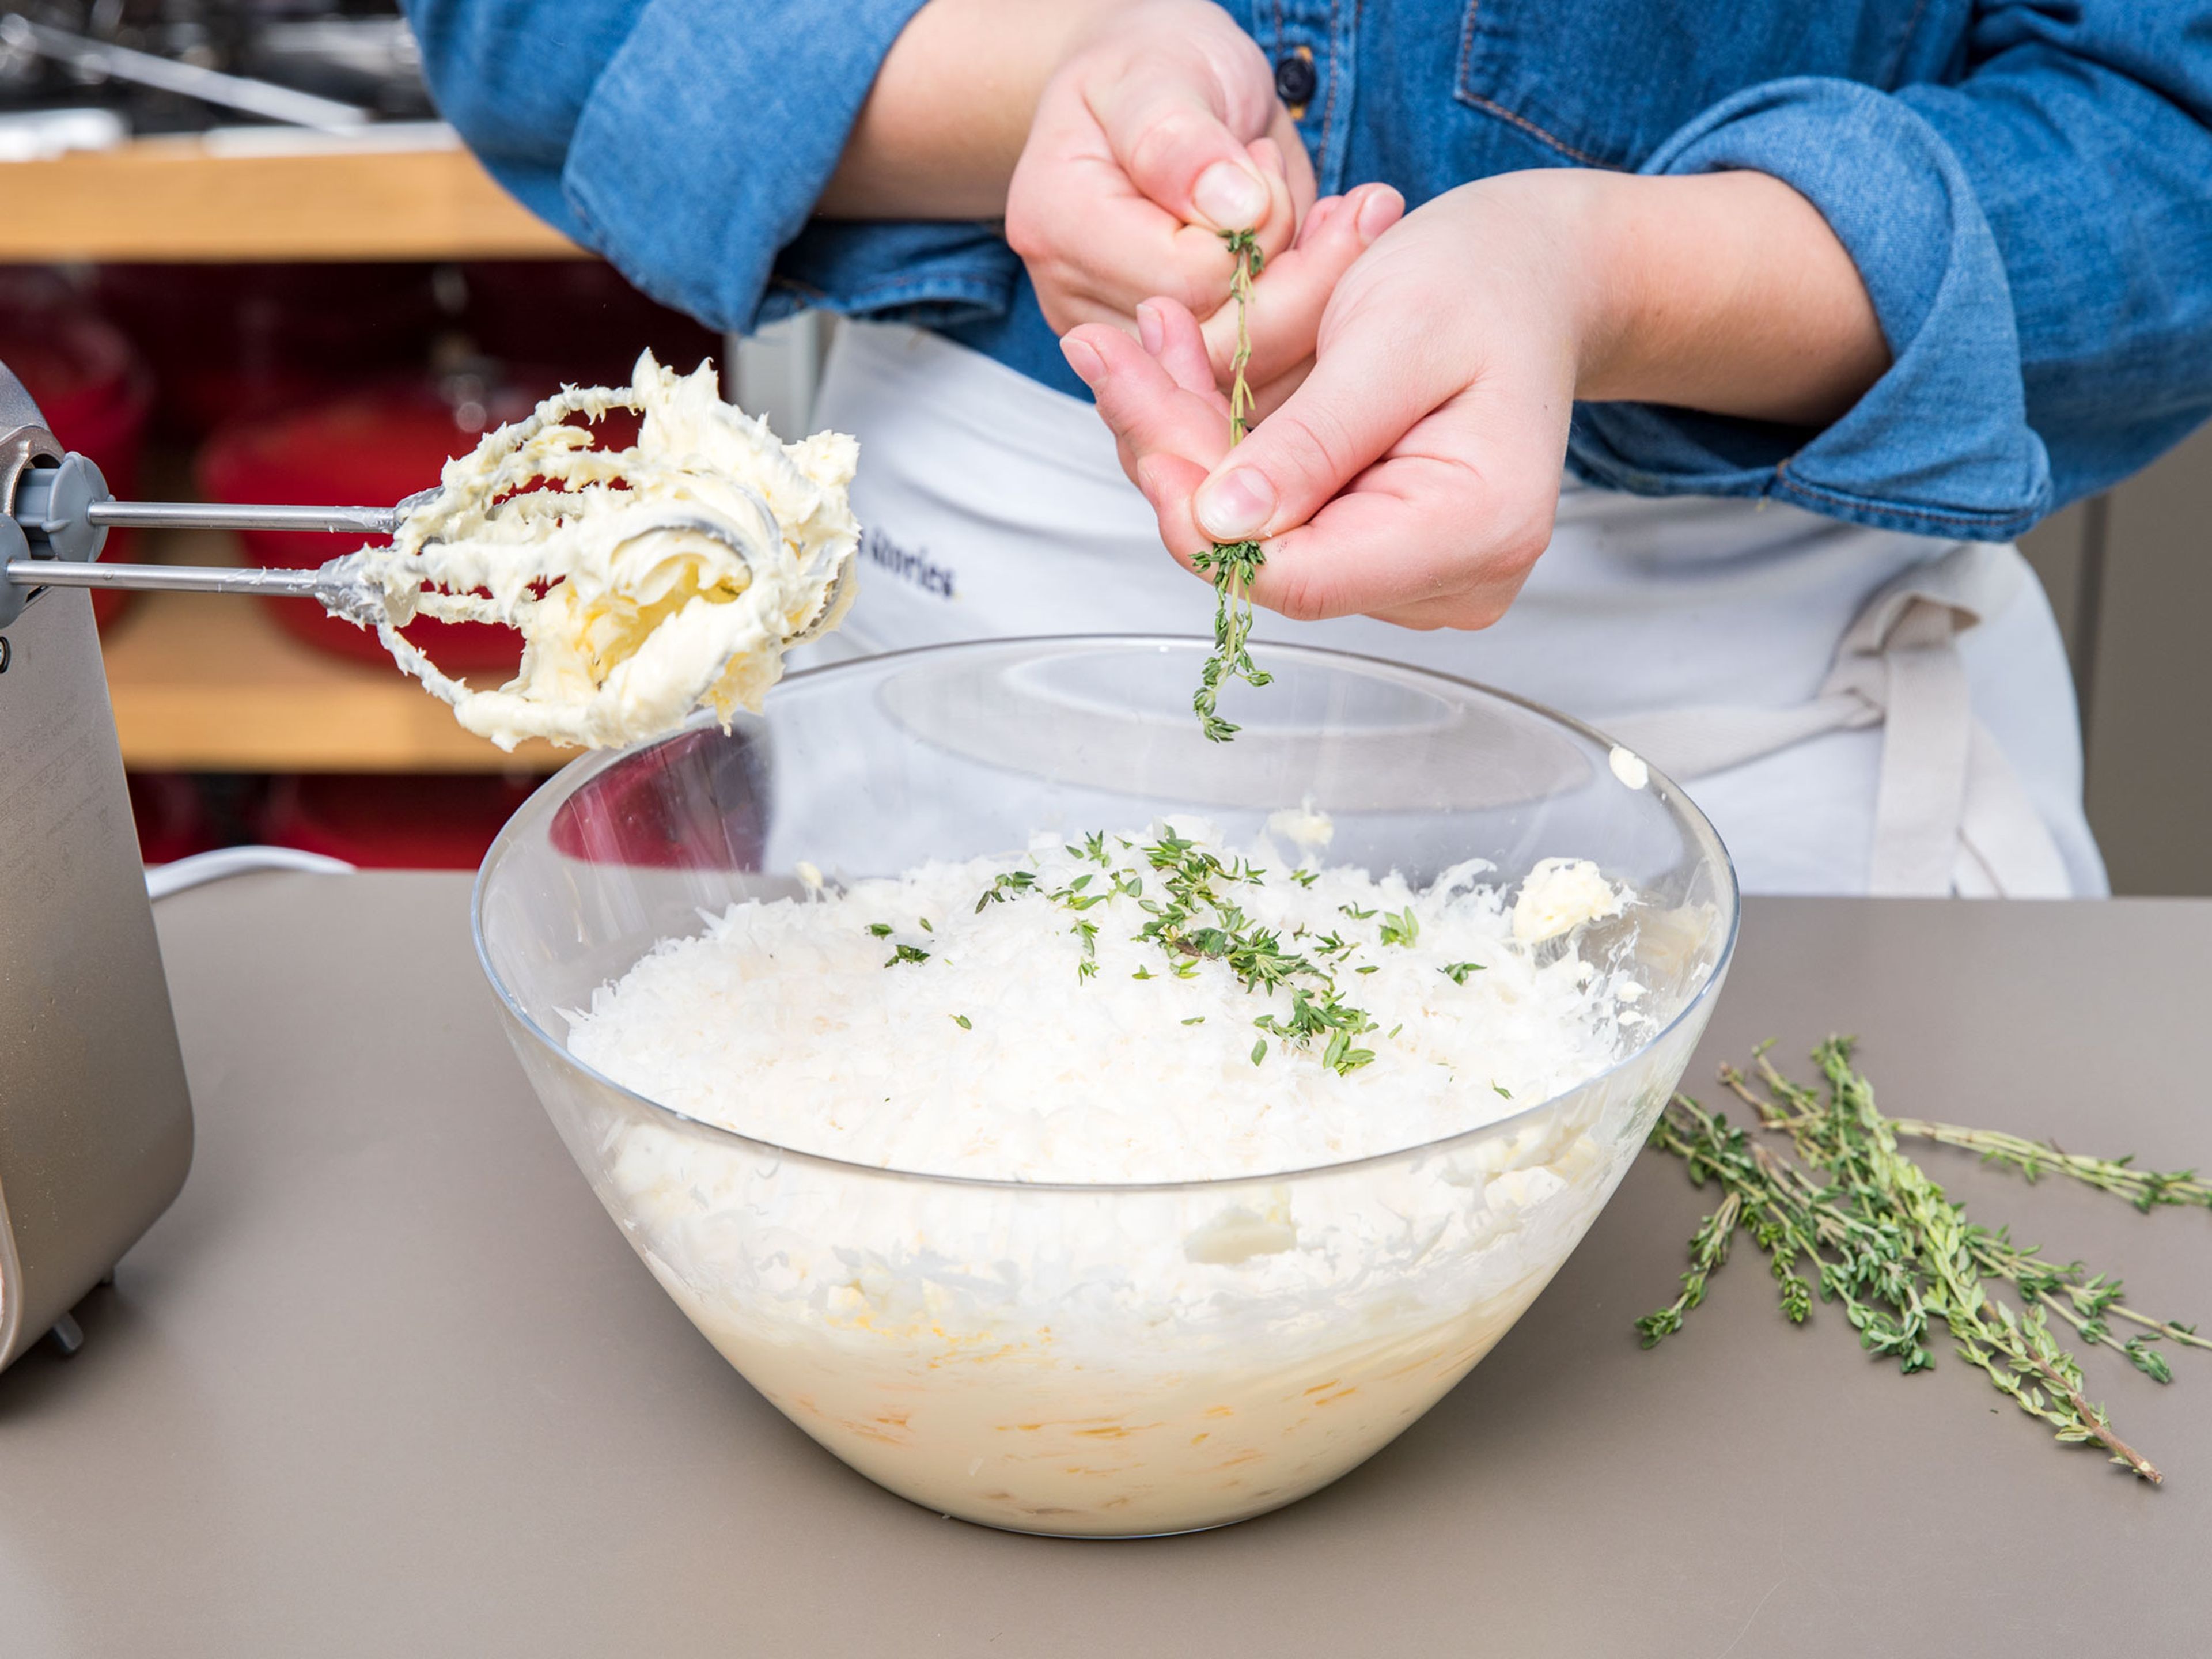 Preheat oven to 180°C/355°F. Pluck fresh thyme leaves from sprigs and set aside. Add soft butter to a bowl and beat with a hand mixer until fluffy. Add grated Parmesan cheese, salt, pepper, and thyme leaves and keep beating until combined. Finally, add flour and starch and stir to combine.